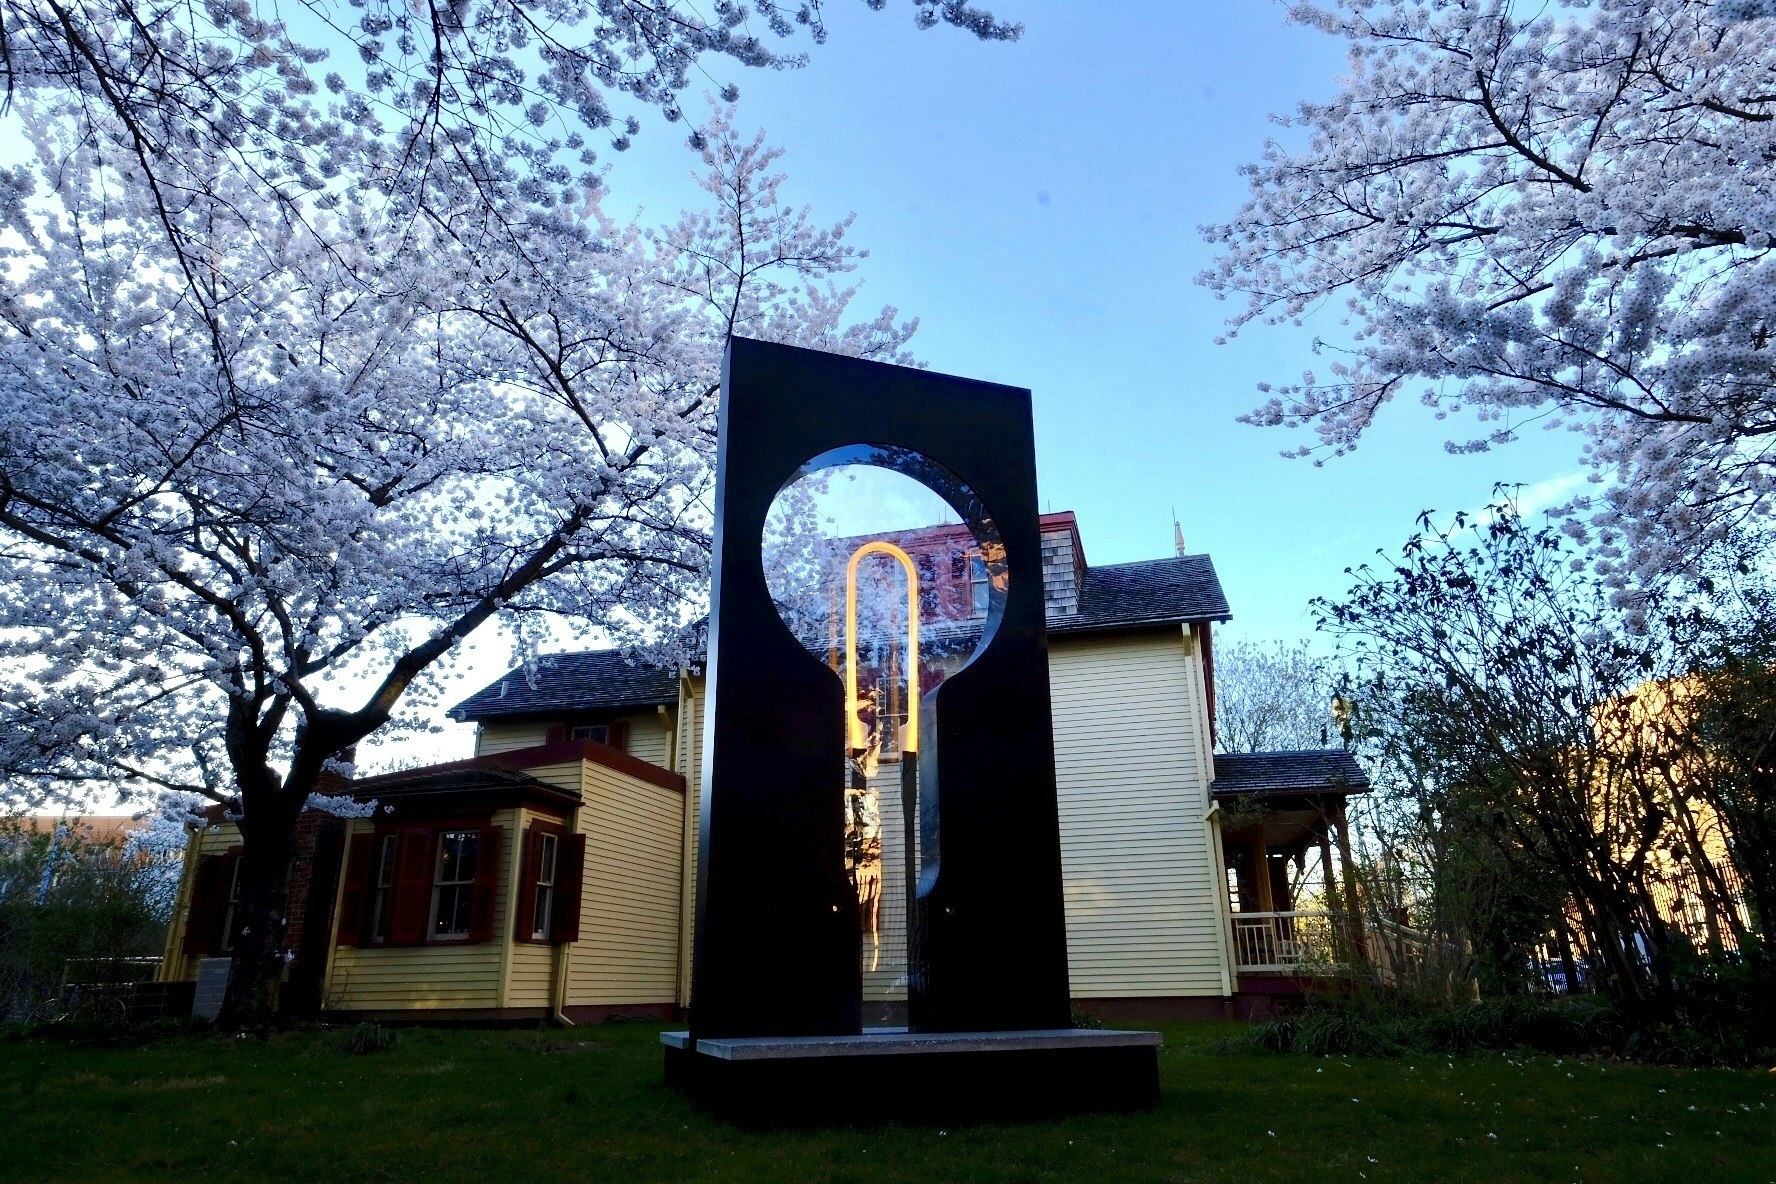 Large, flat sculpture with the outline of a bulb and a lit filament in the center, in front of a two-story house and surrounded by cherry blossom trees.